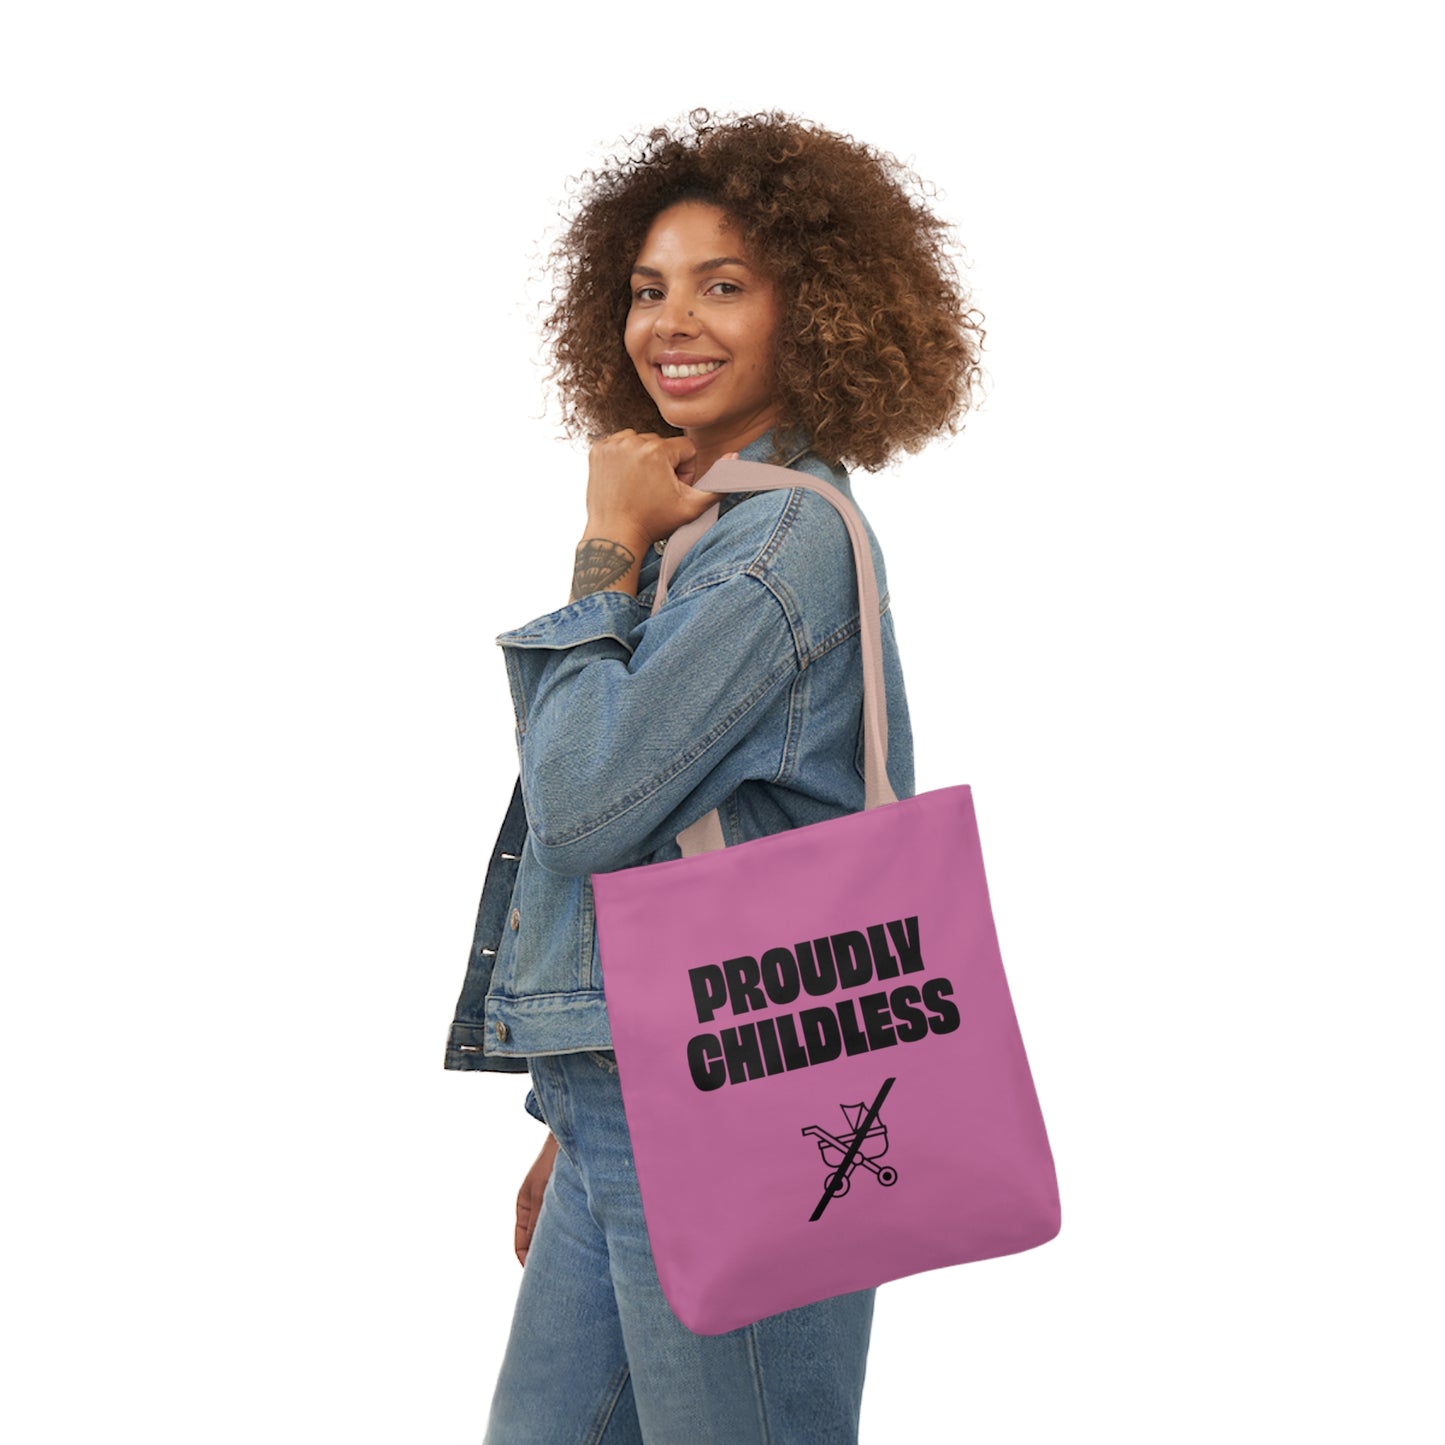 Proudly Childless Tote Bag